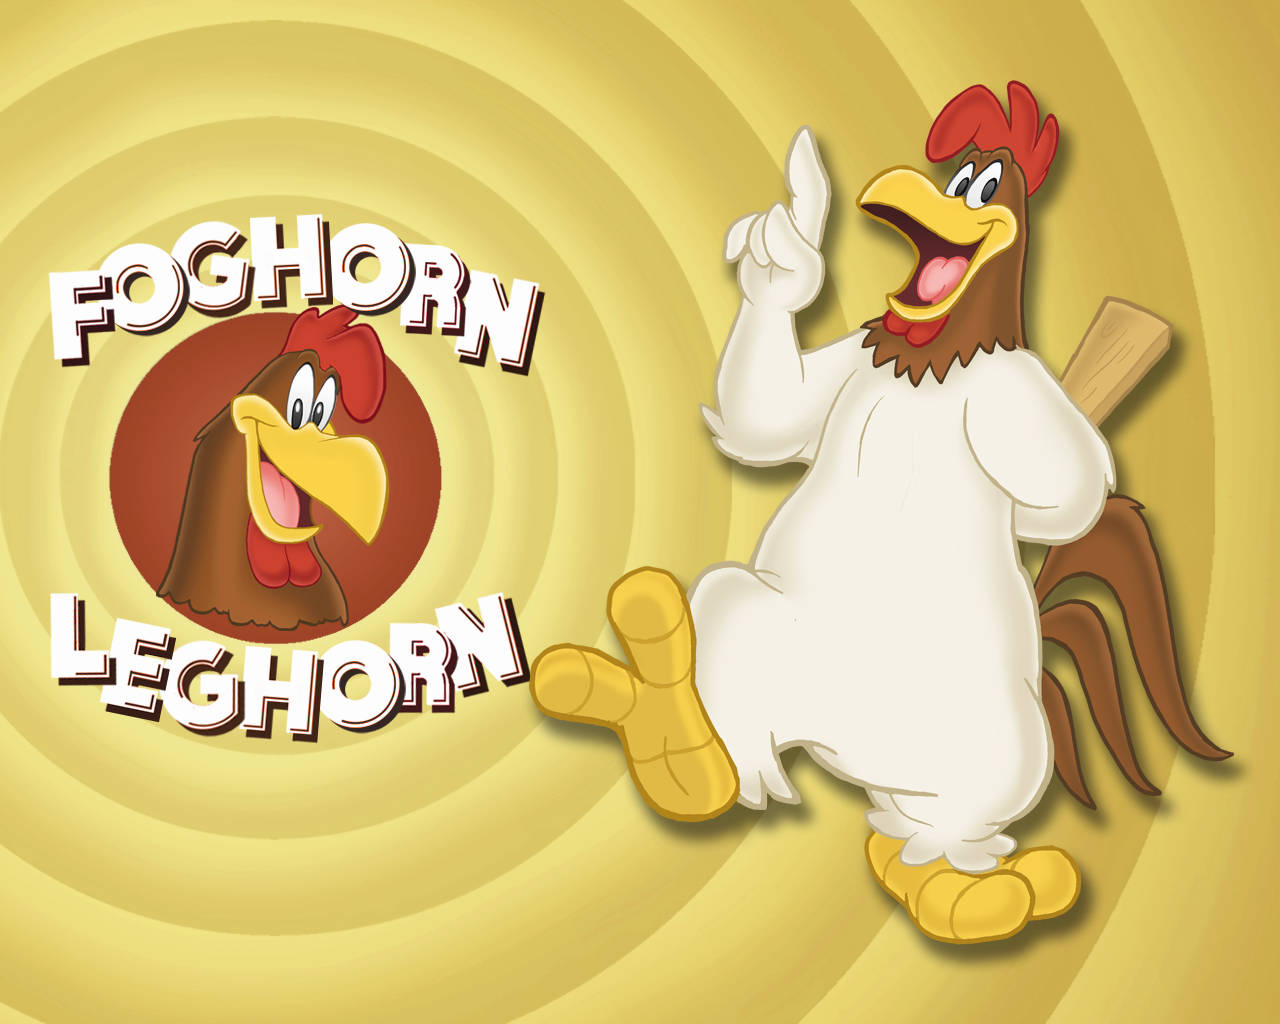 Free Foghorn Leghorn Chicken Hawk Viewing Gallery For Your Desktop, Mobile & Tablet. Explore Foghorn Leghorn Wallpaper. Foghorn Leghorn Wallpaper Wallpaper